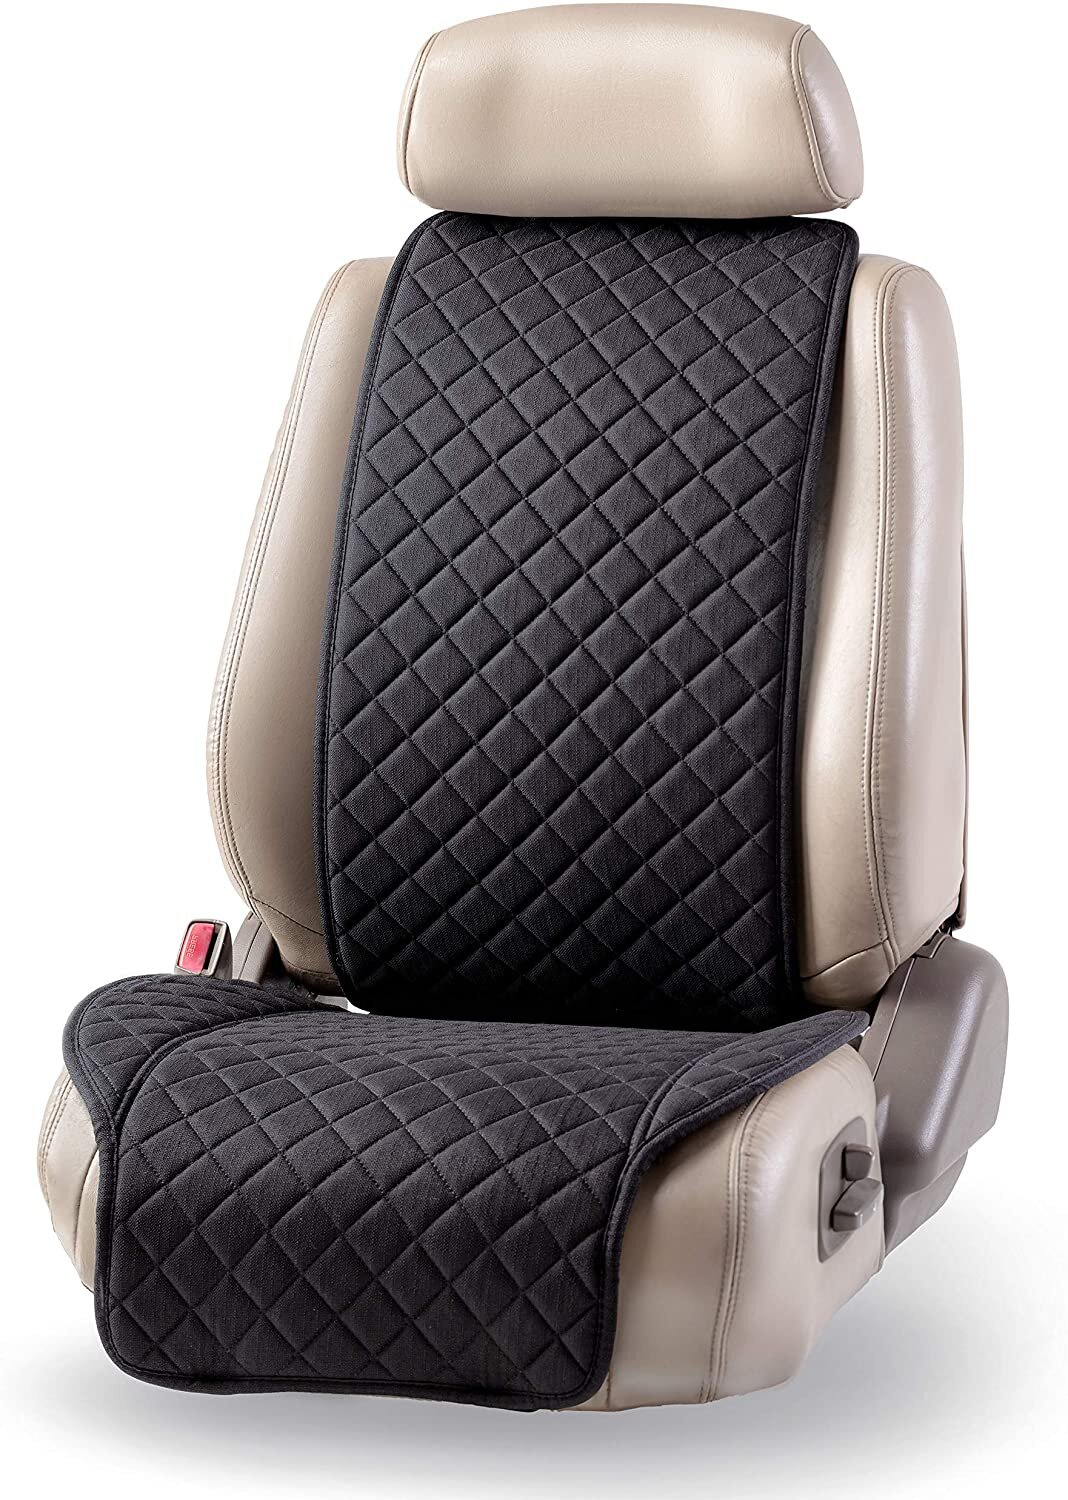 Non-slip increase comfort Car Seat Cushion Cover Fits Car Office Home Class Room 